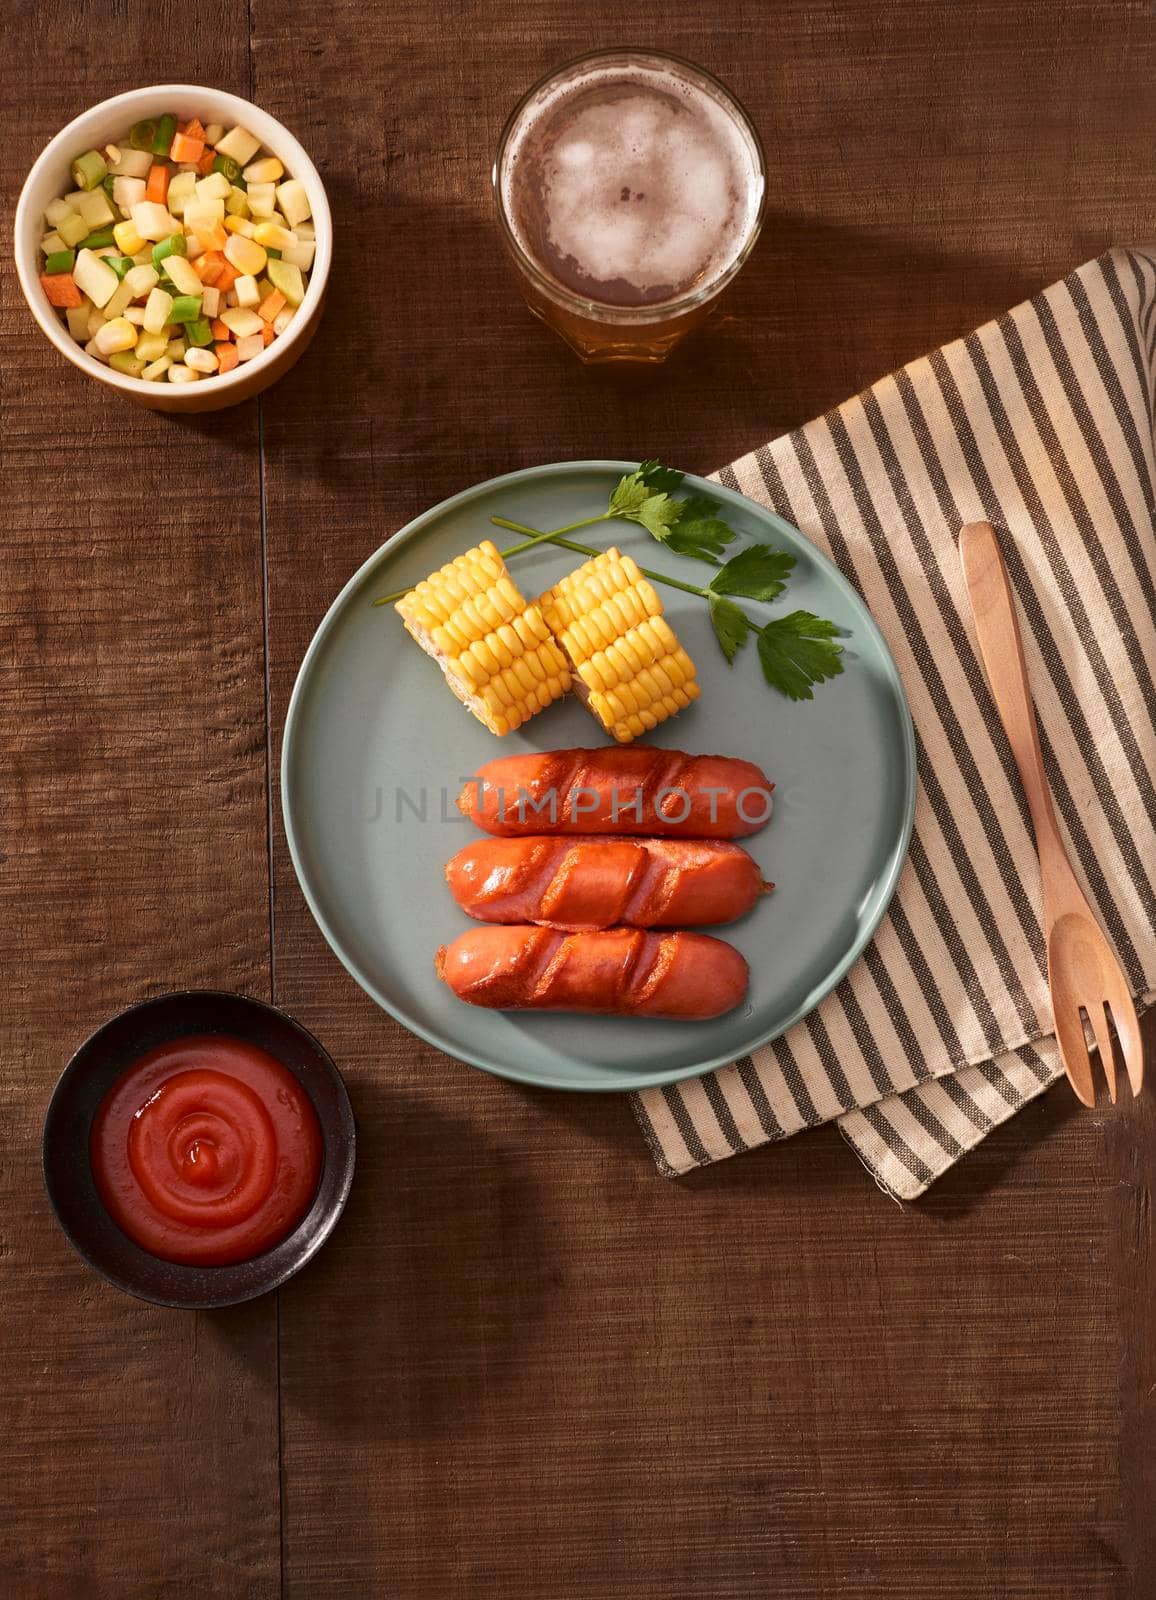 Home grilled sausages on a dark plate, a meat dish on a dark wooden background, hot sausages with spices and salt in a home kitchen, copy space, rustic style, art